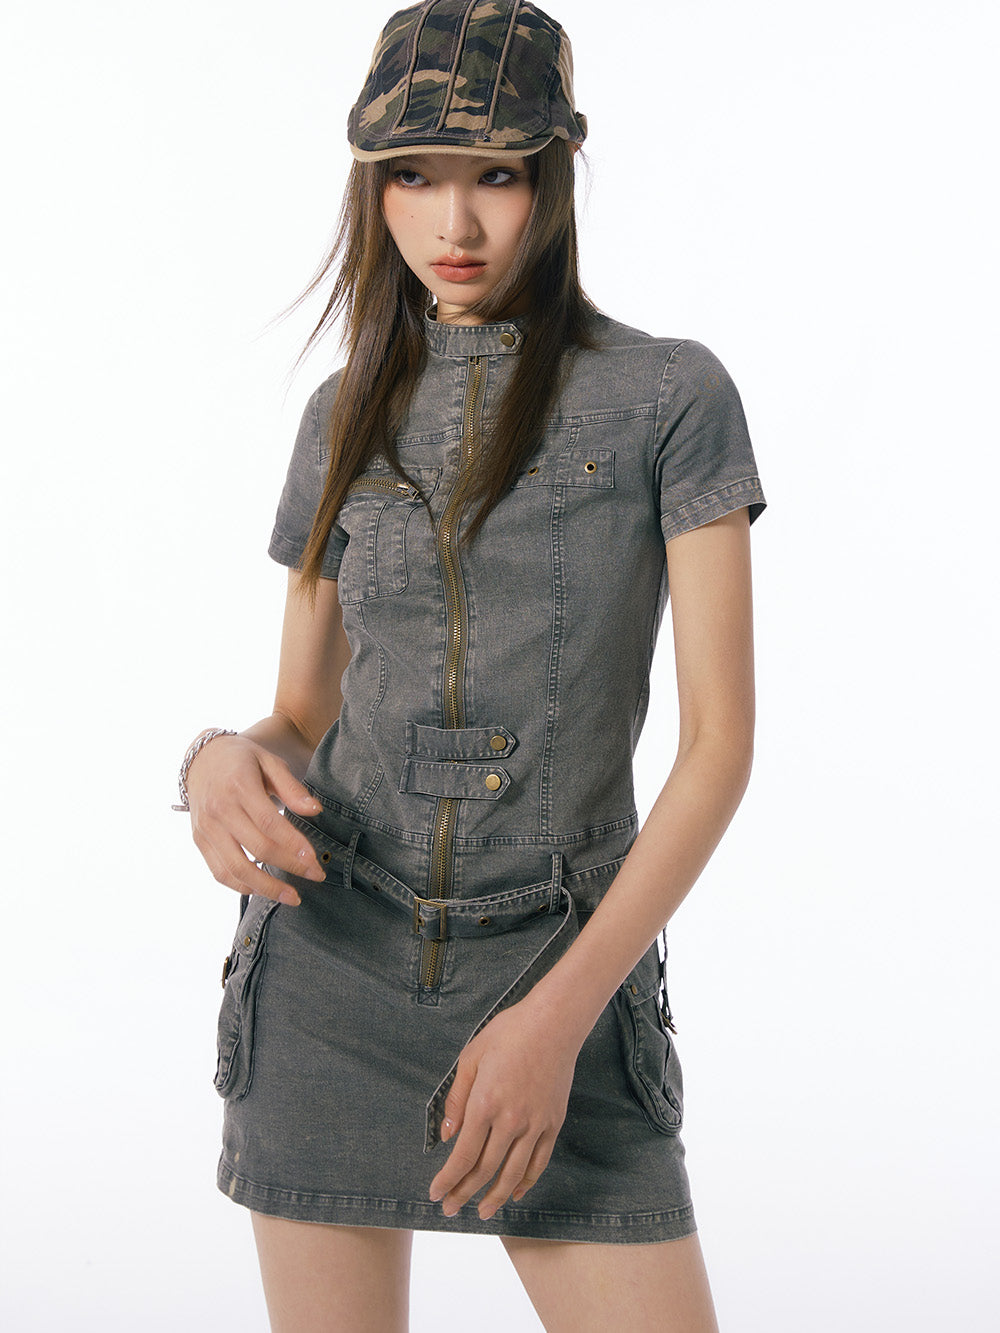 MUKTANK×WESAME Europe Casual Frock Stero Hip-packing Jeans Dresses